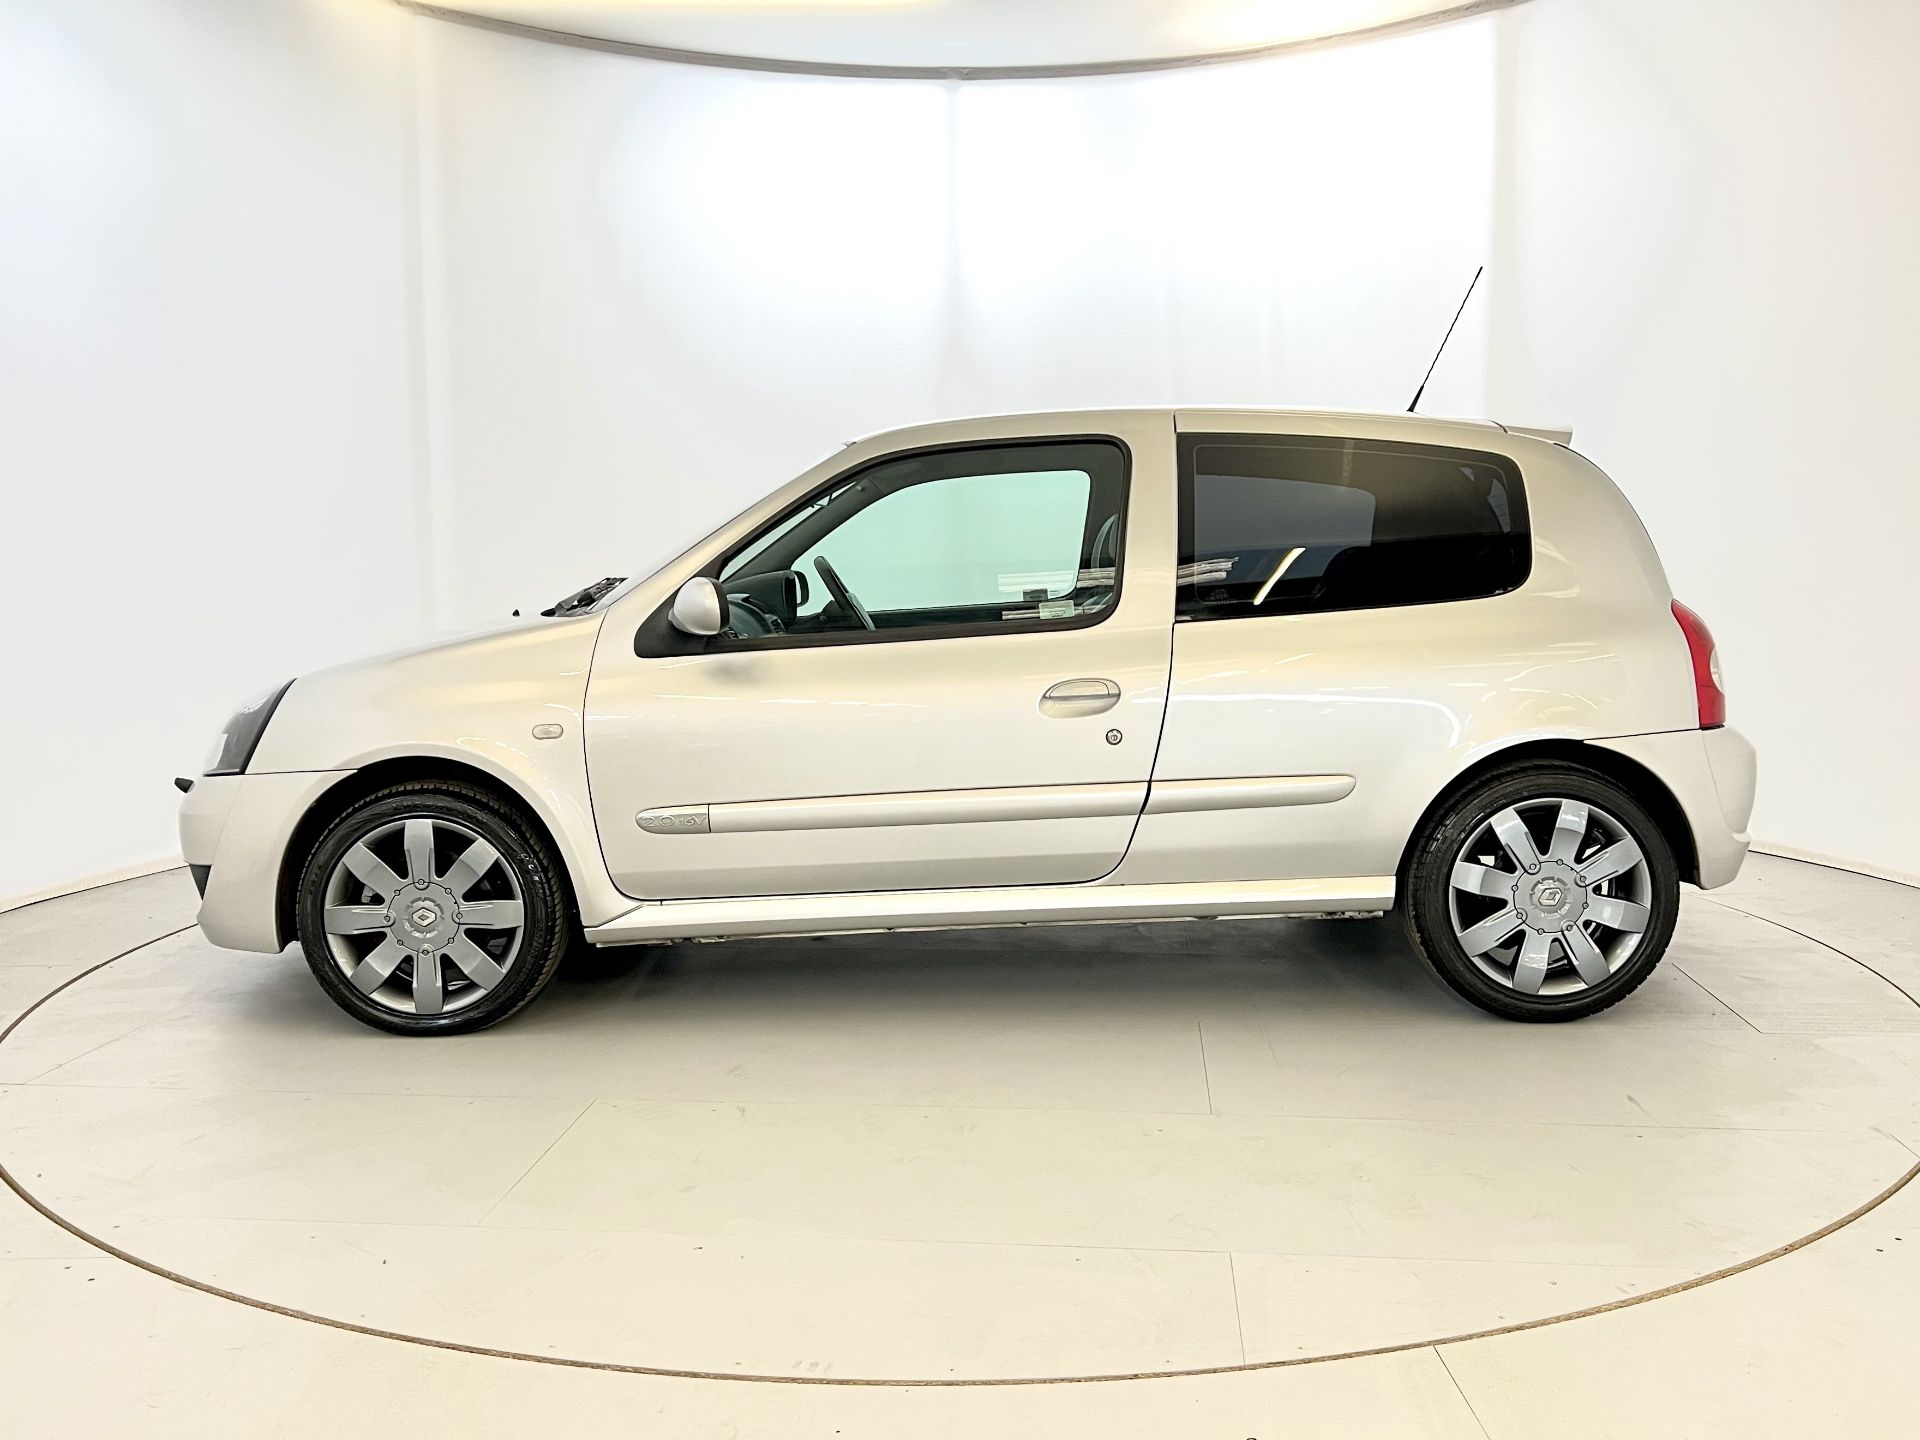 Renault Clio 182 Cup - Image 5 of 31